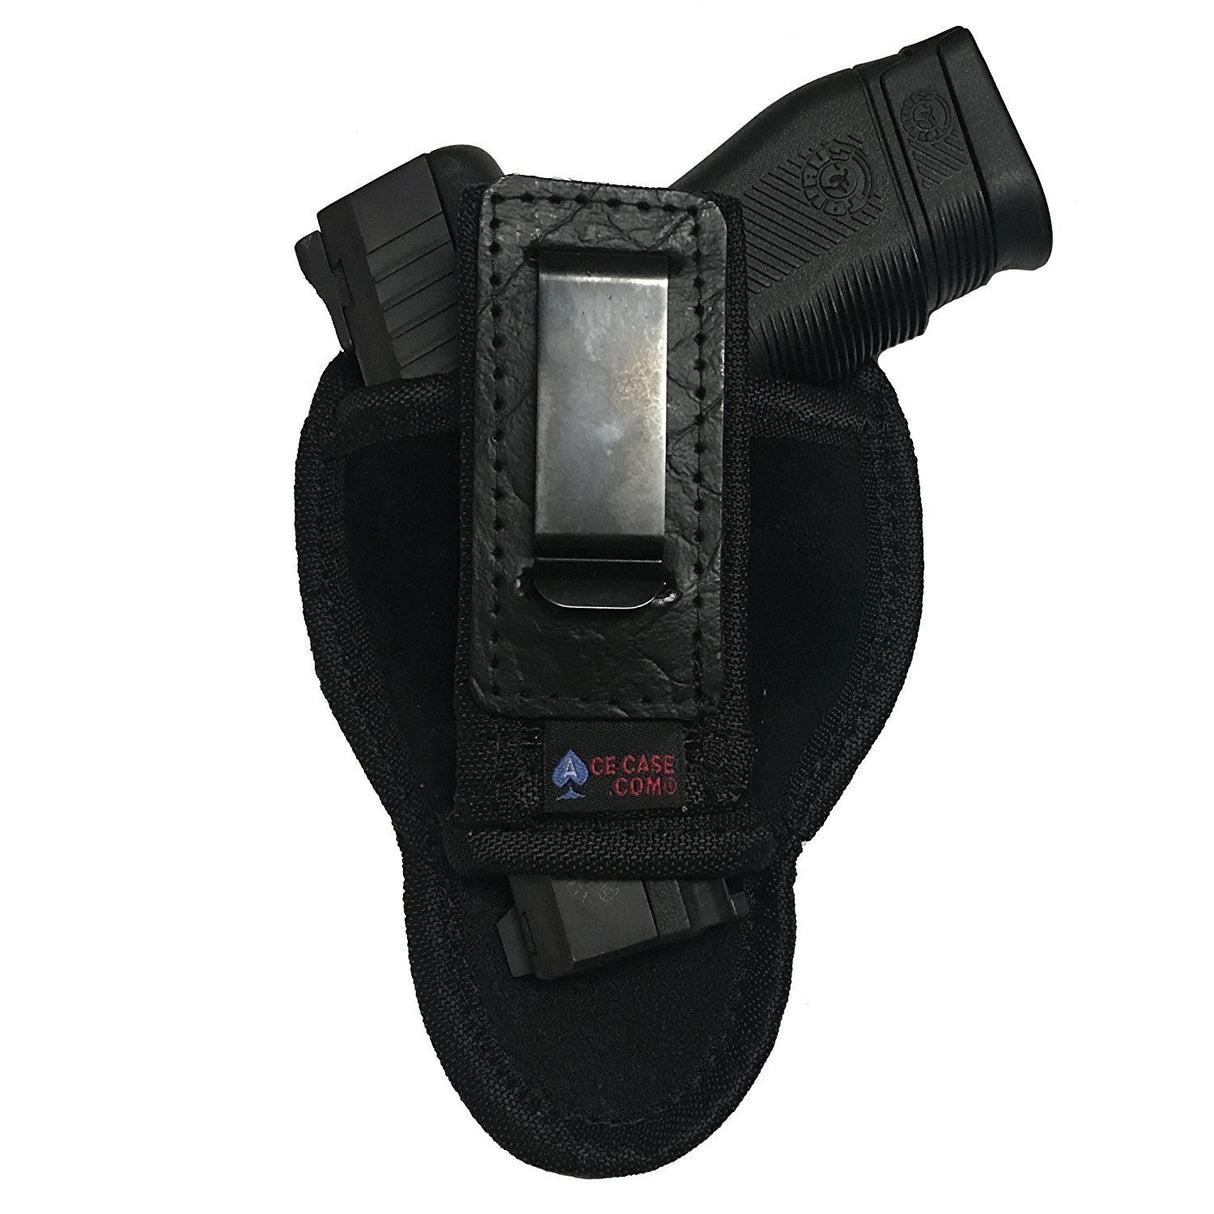 Ace Case Ruger P89; P90; P97 Inside The Pants Holster - Made in U.S.A.